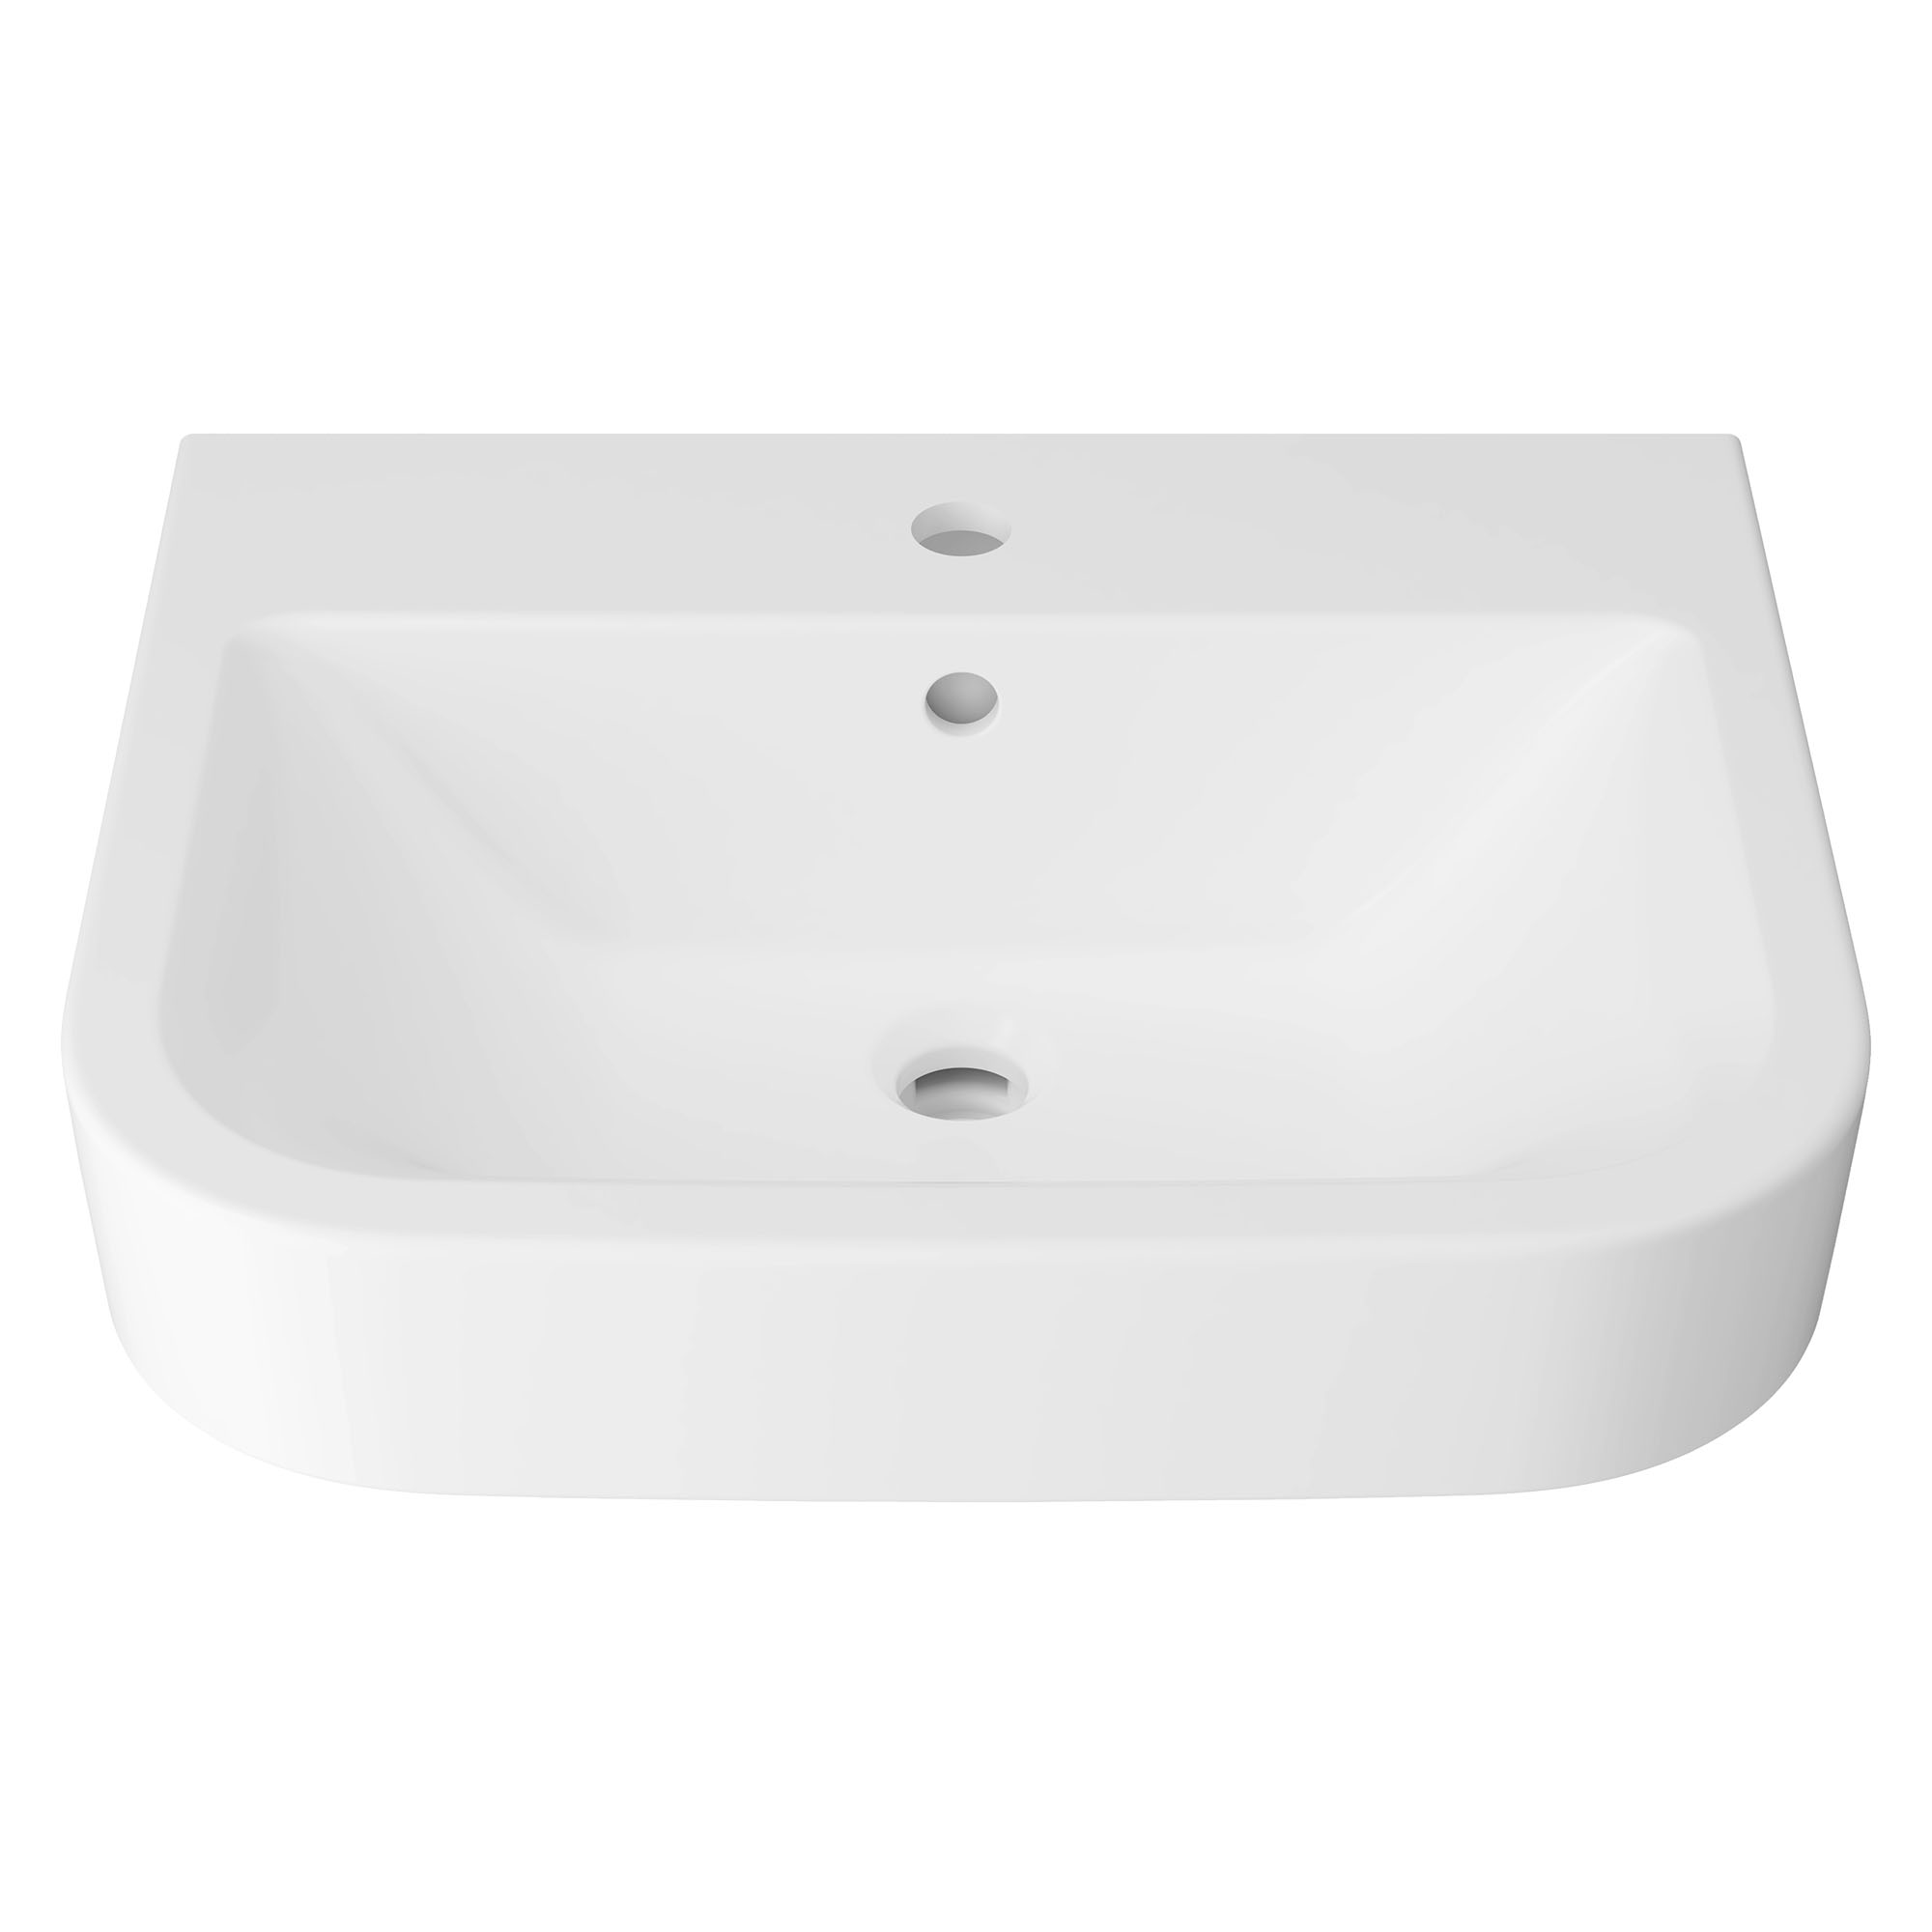 EQUILITY 22-In Single Hole Wall-Hung Bathroom Sink  - PROJECTS MODEL